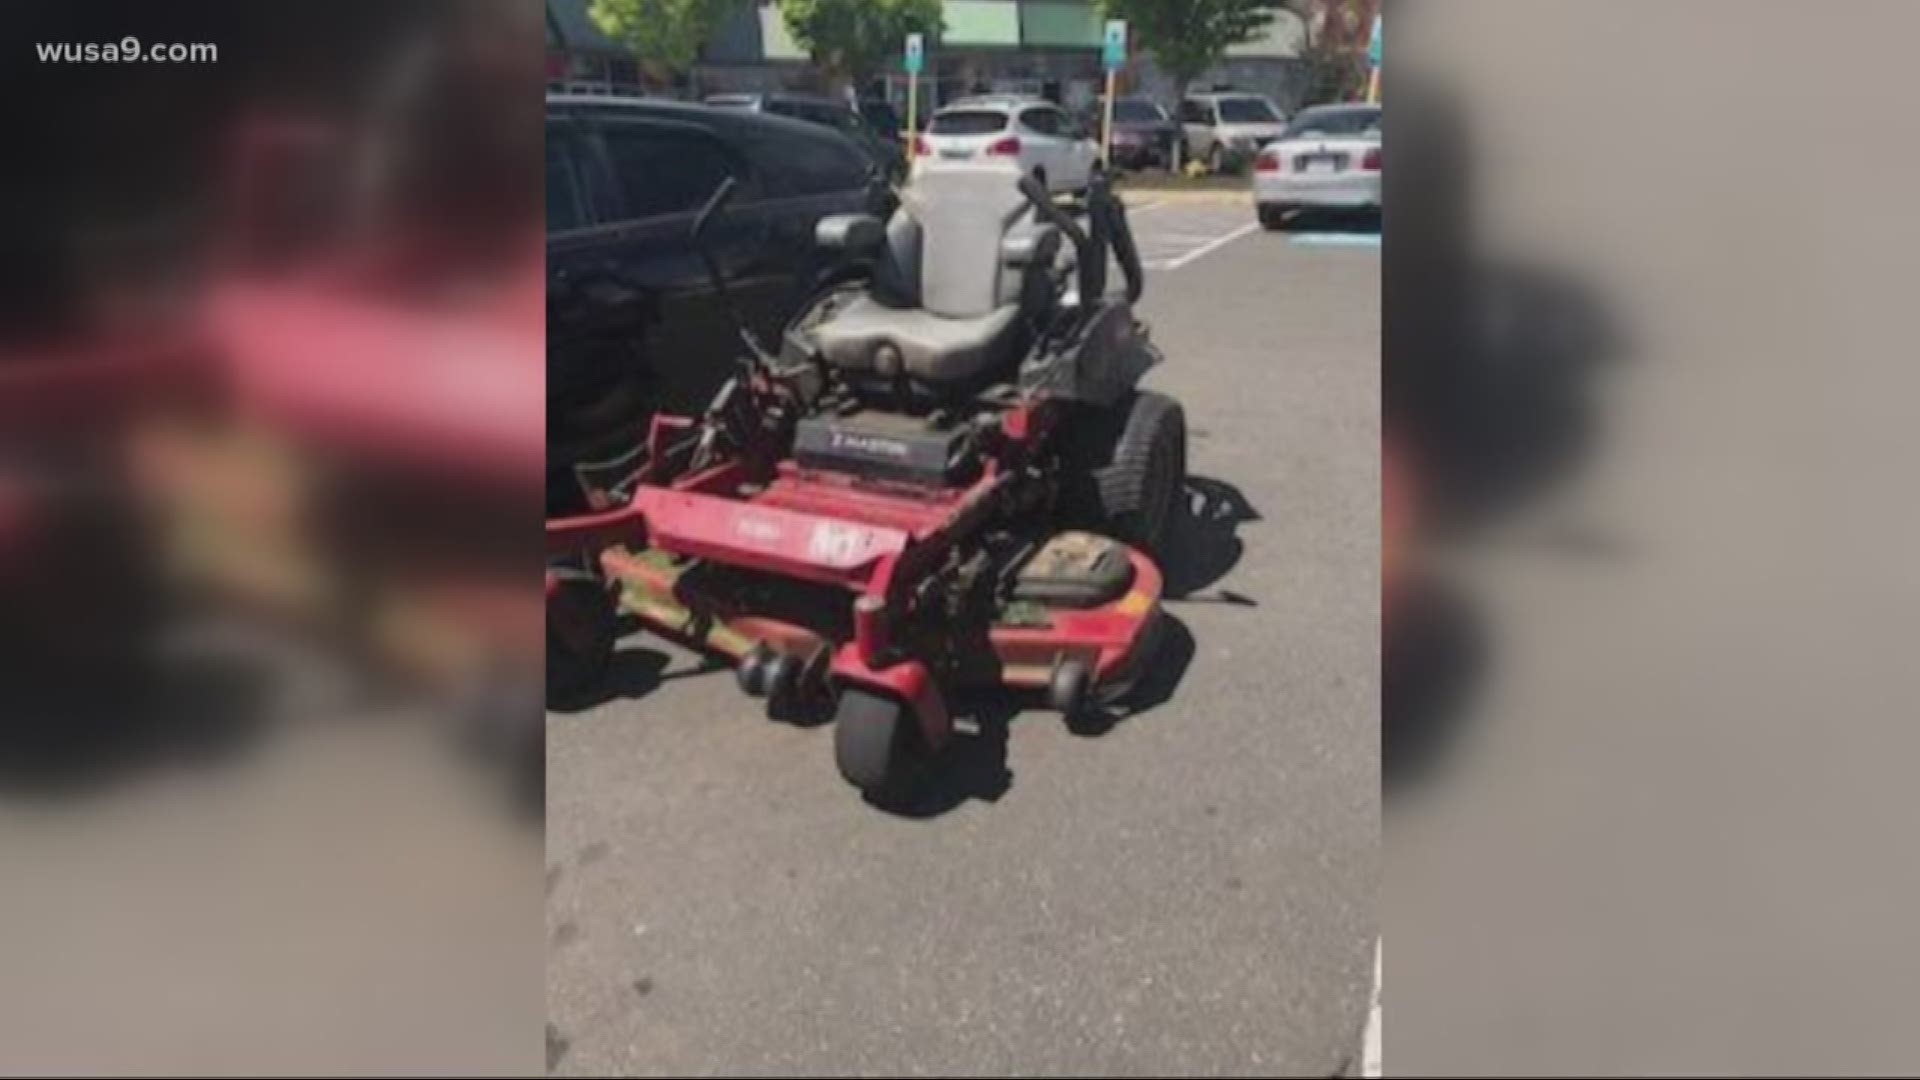 How can you be country and a bad driver? This person drove their lawnmower to a shopping mall. Only in the DMV.